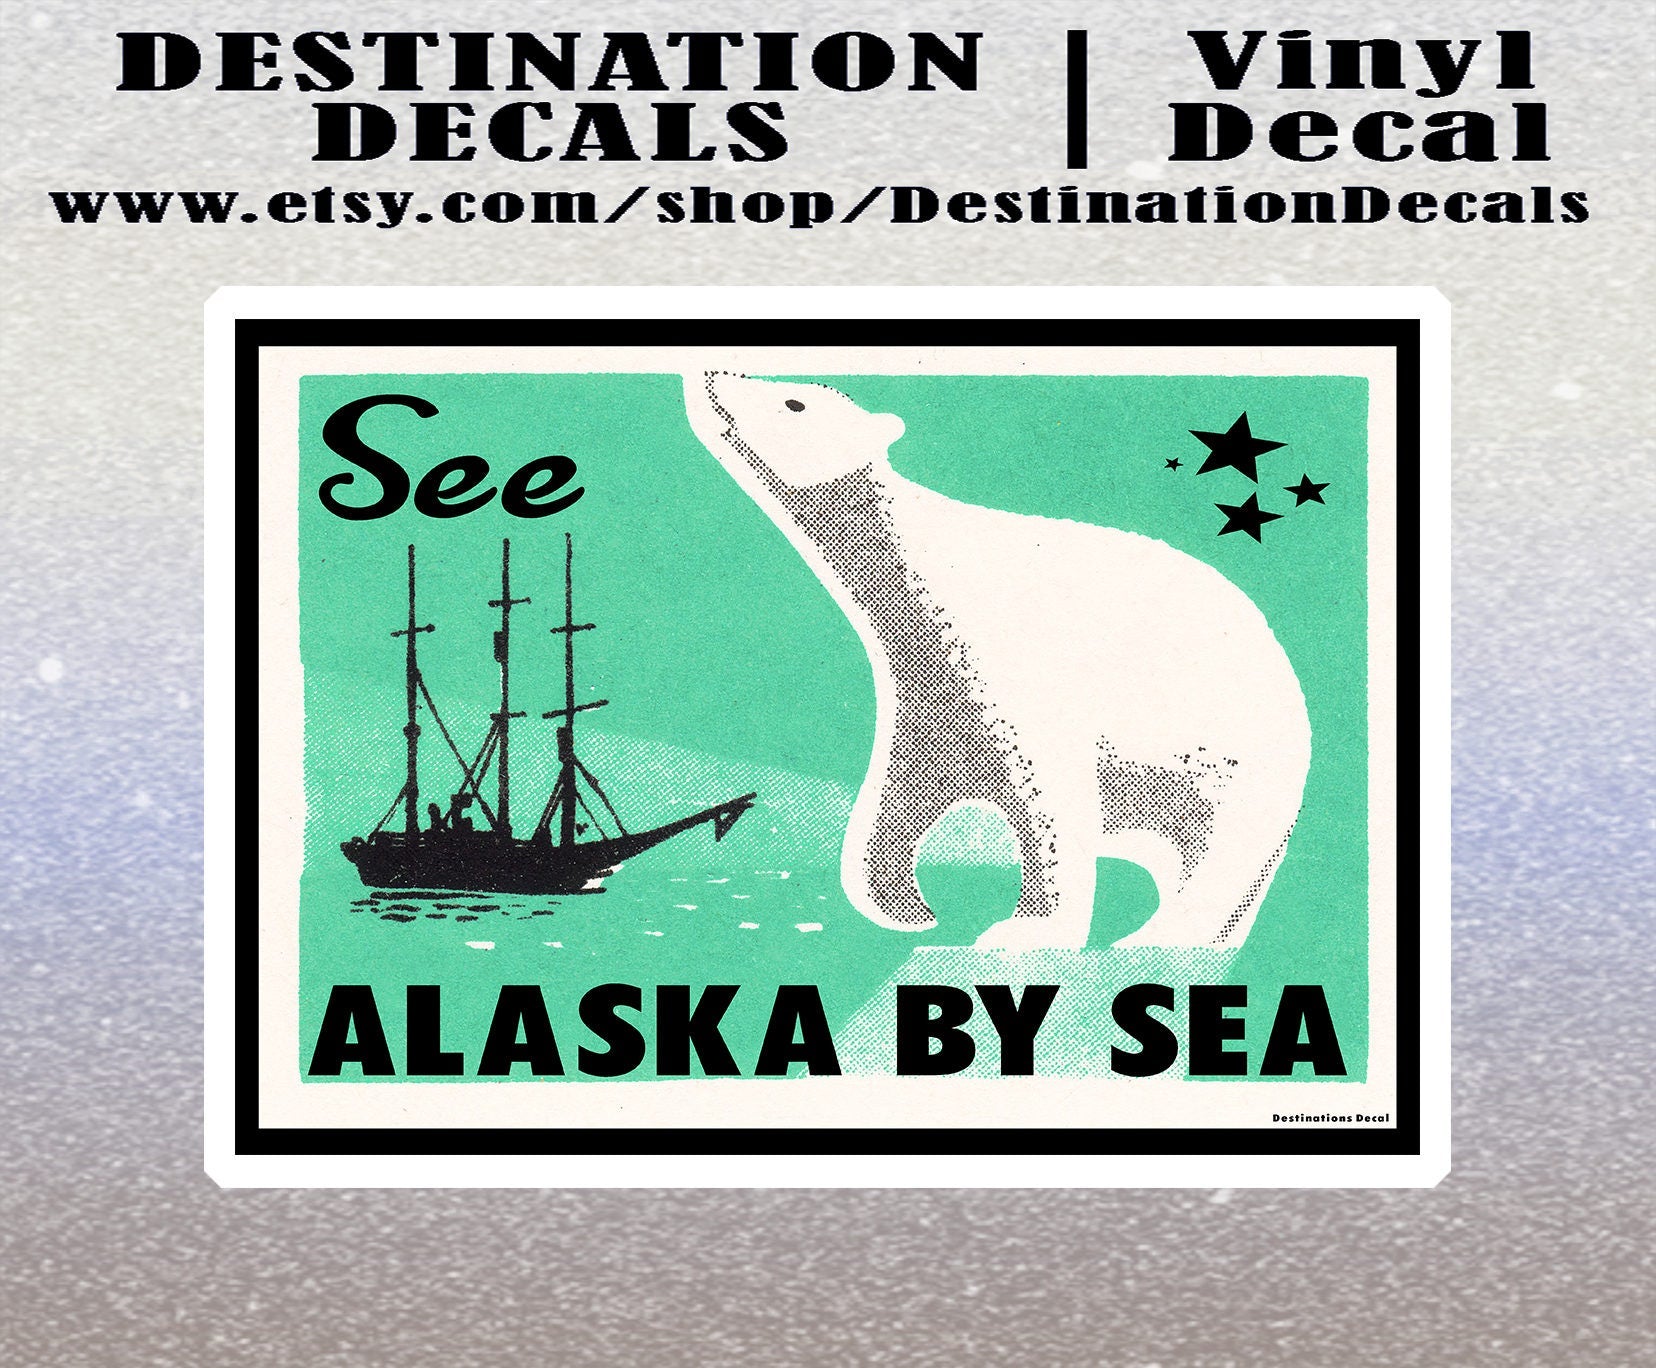 Alaska By Sea Decal Sticker 4" x 2.8" Bering Sea Vintage Old Style